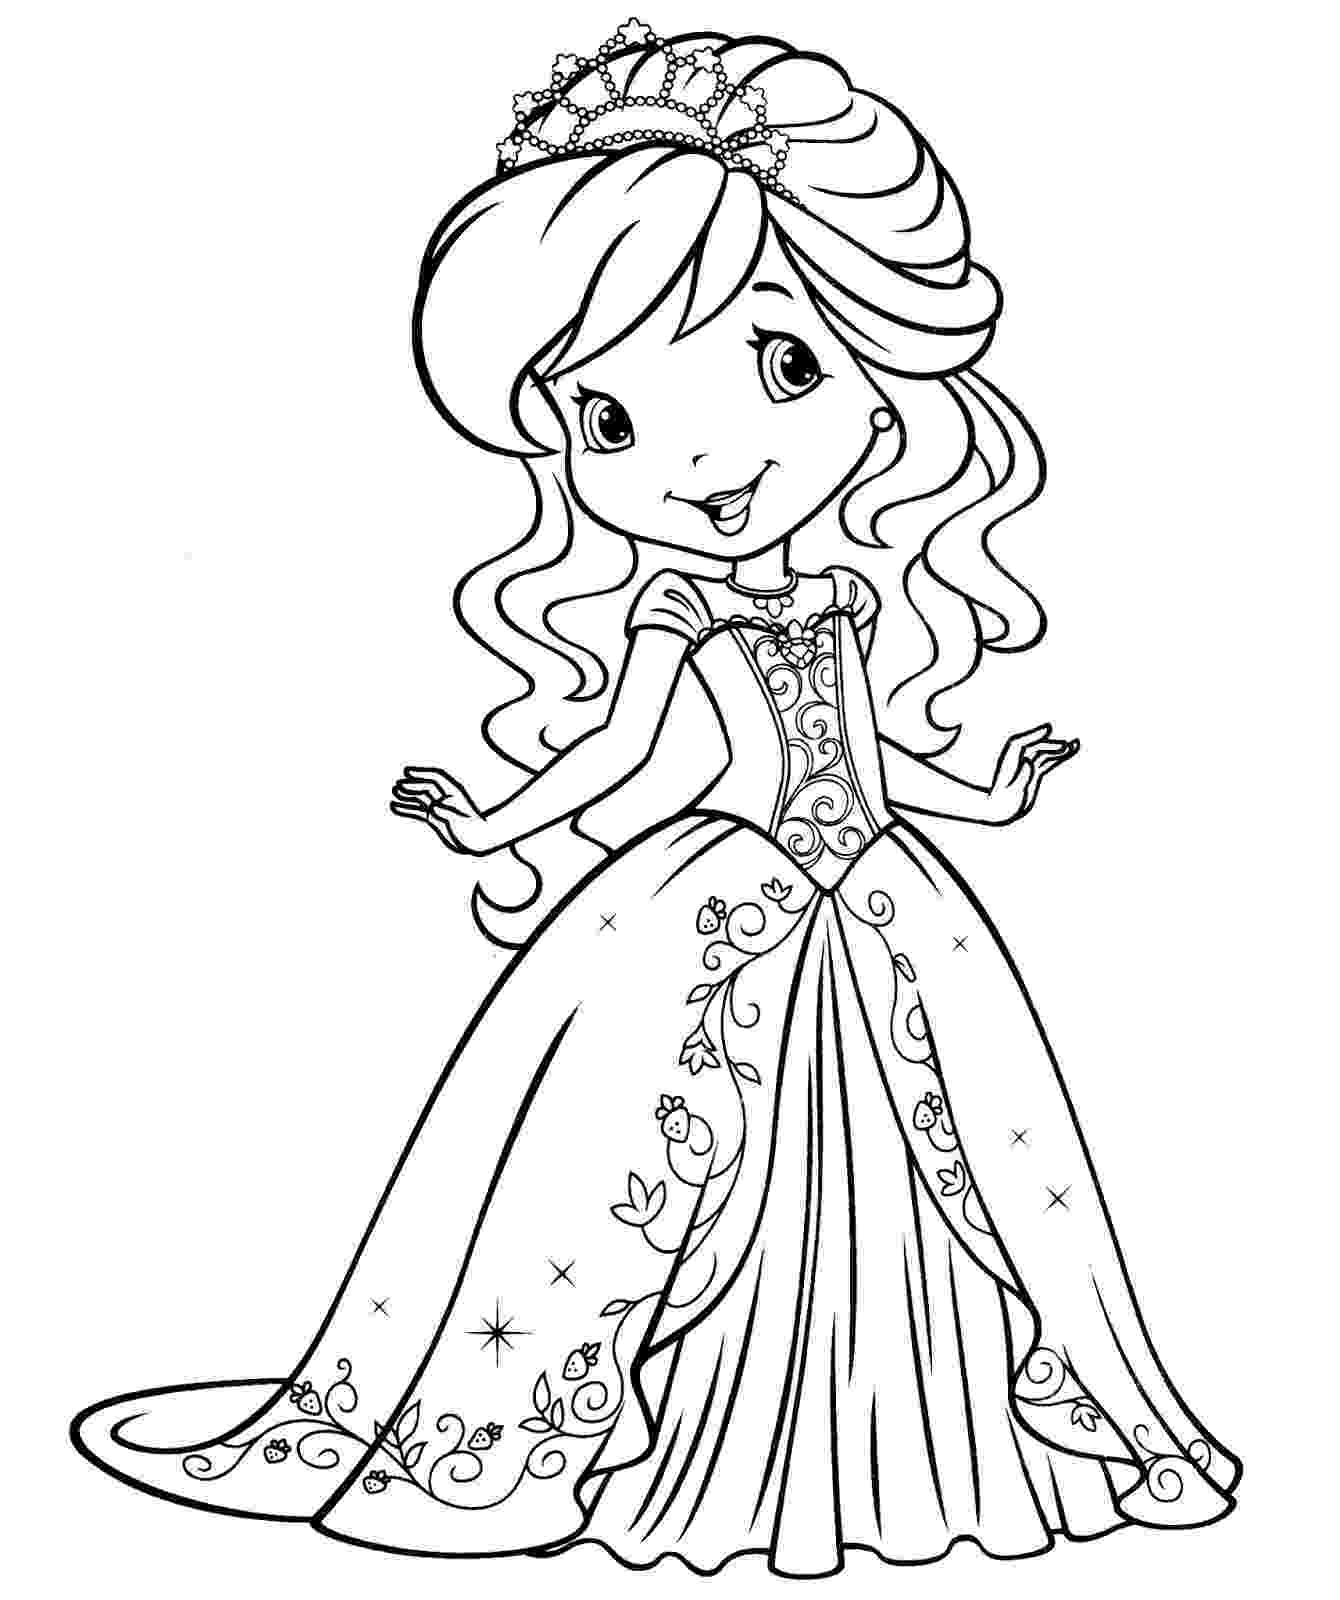 free colouring pages for girls best free printable coloring pages for kids and teens girls free for colouring pages 